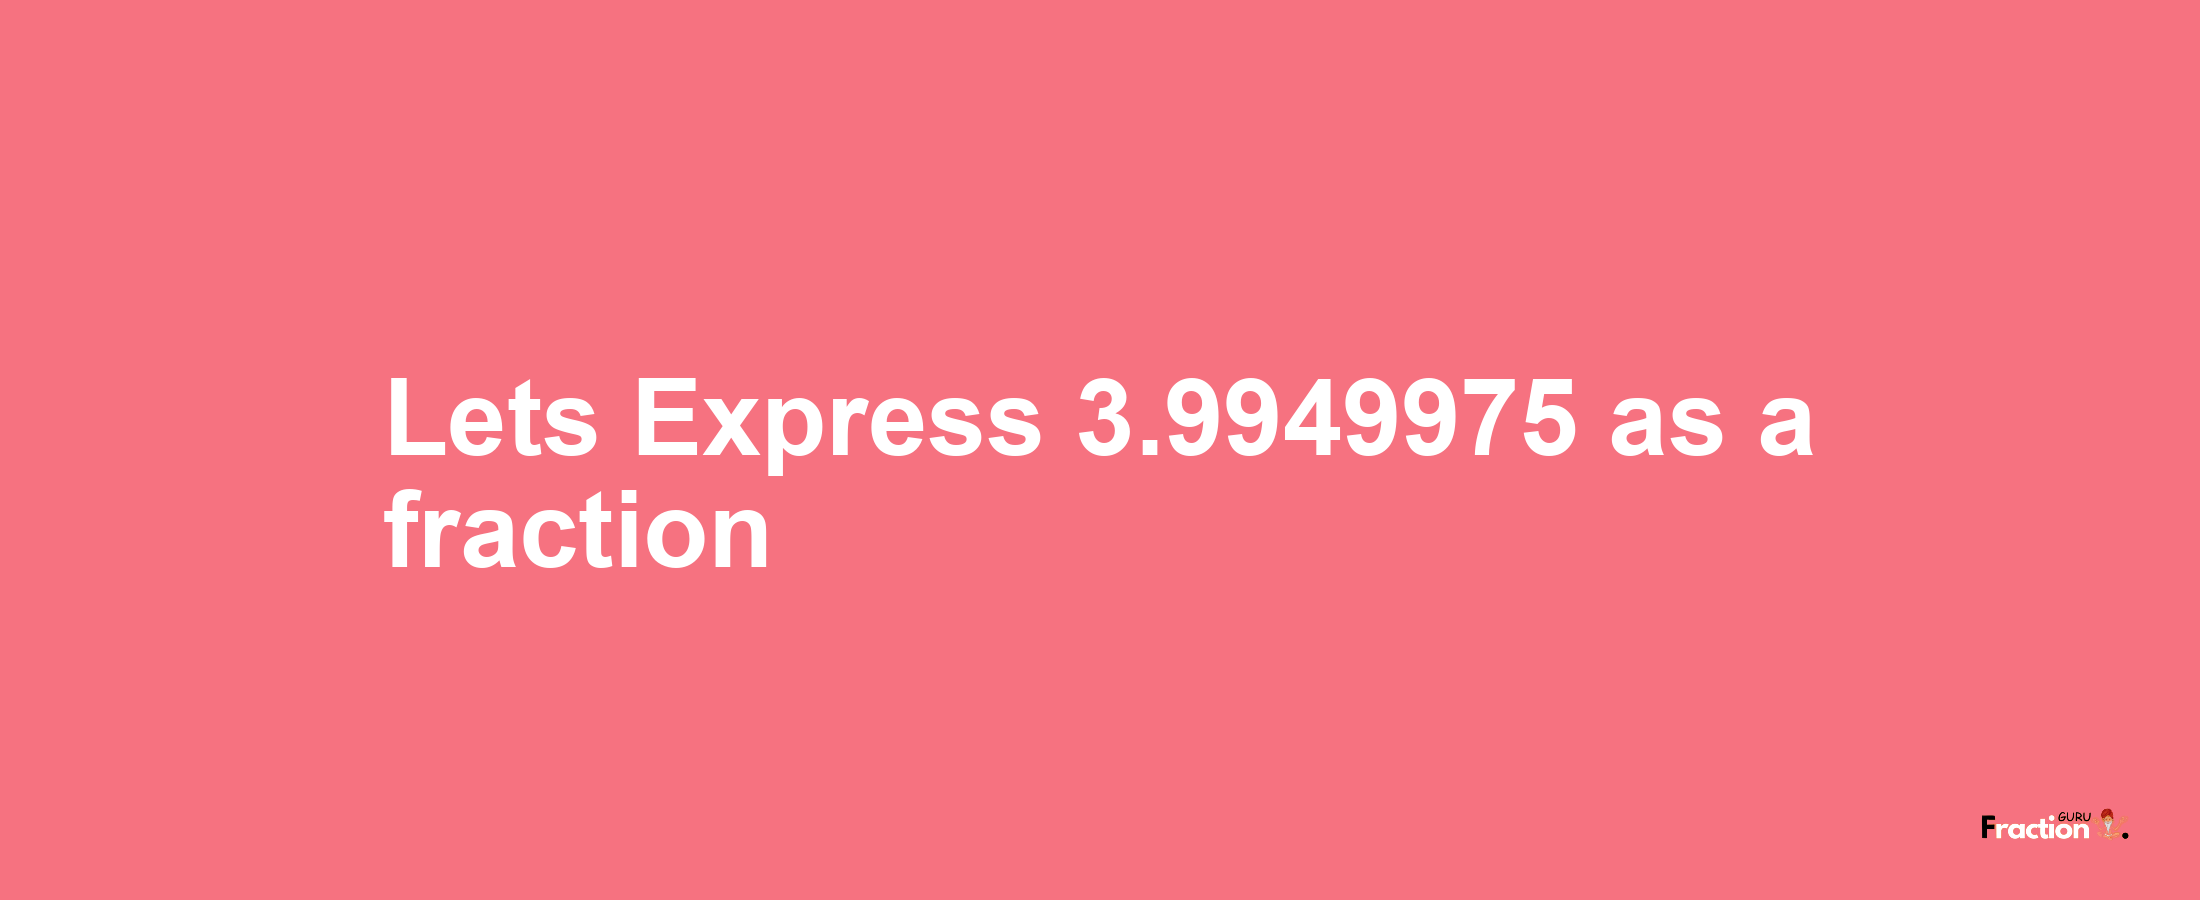 Lets Express 3.9949975 as afraction